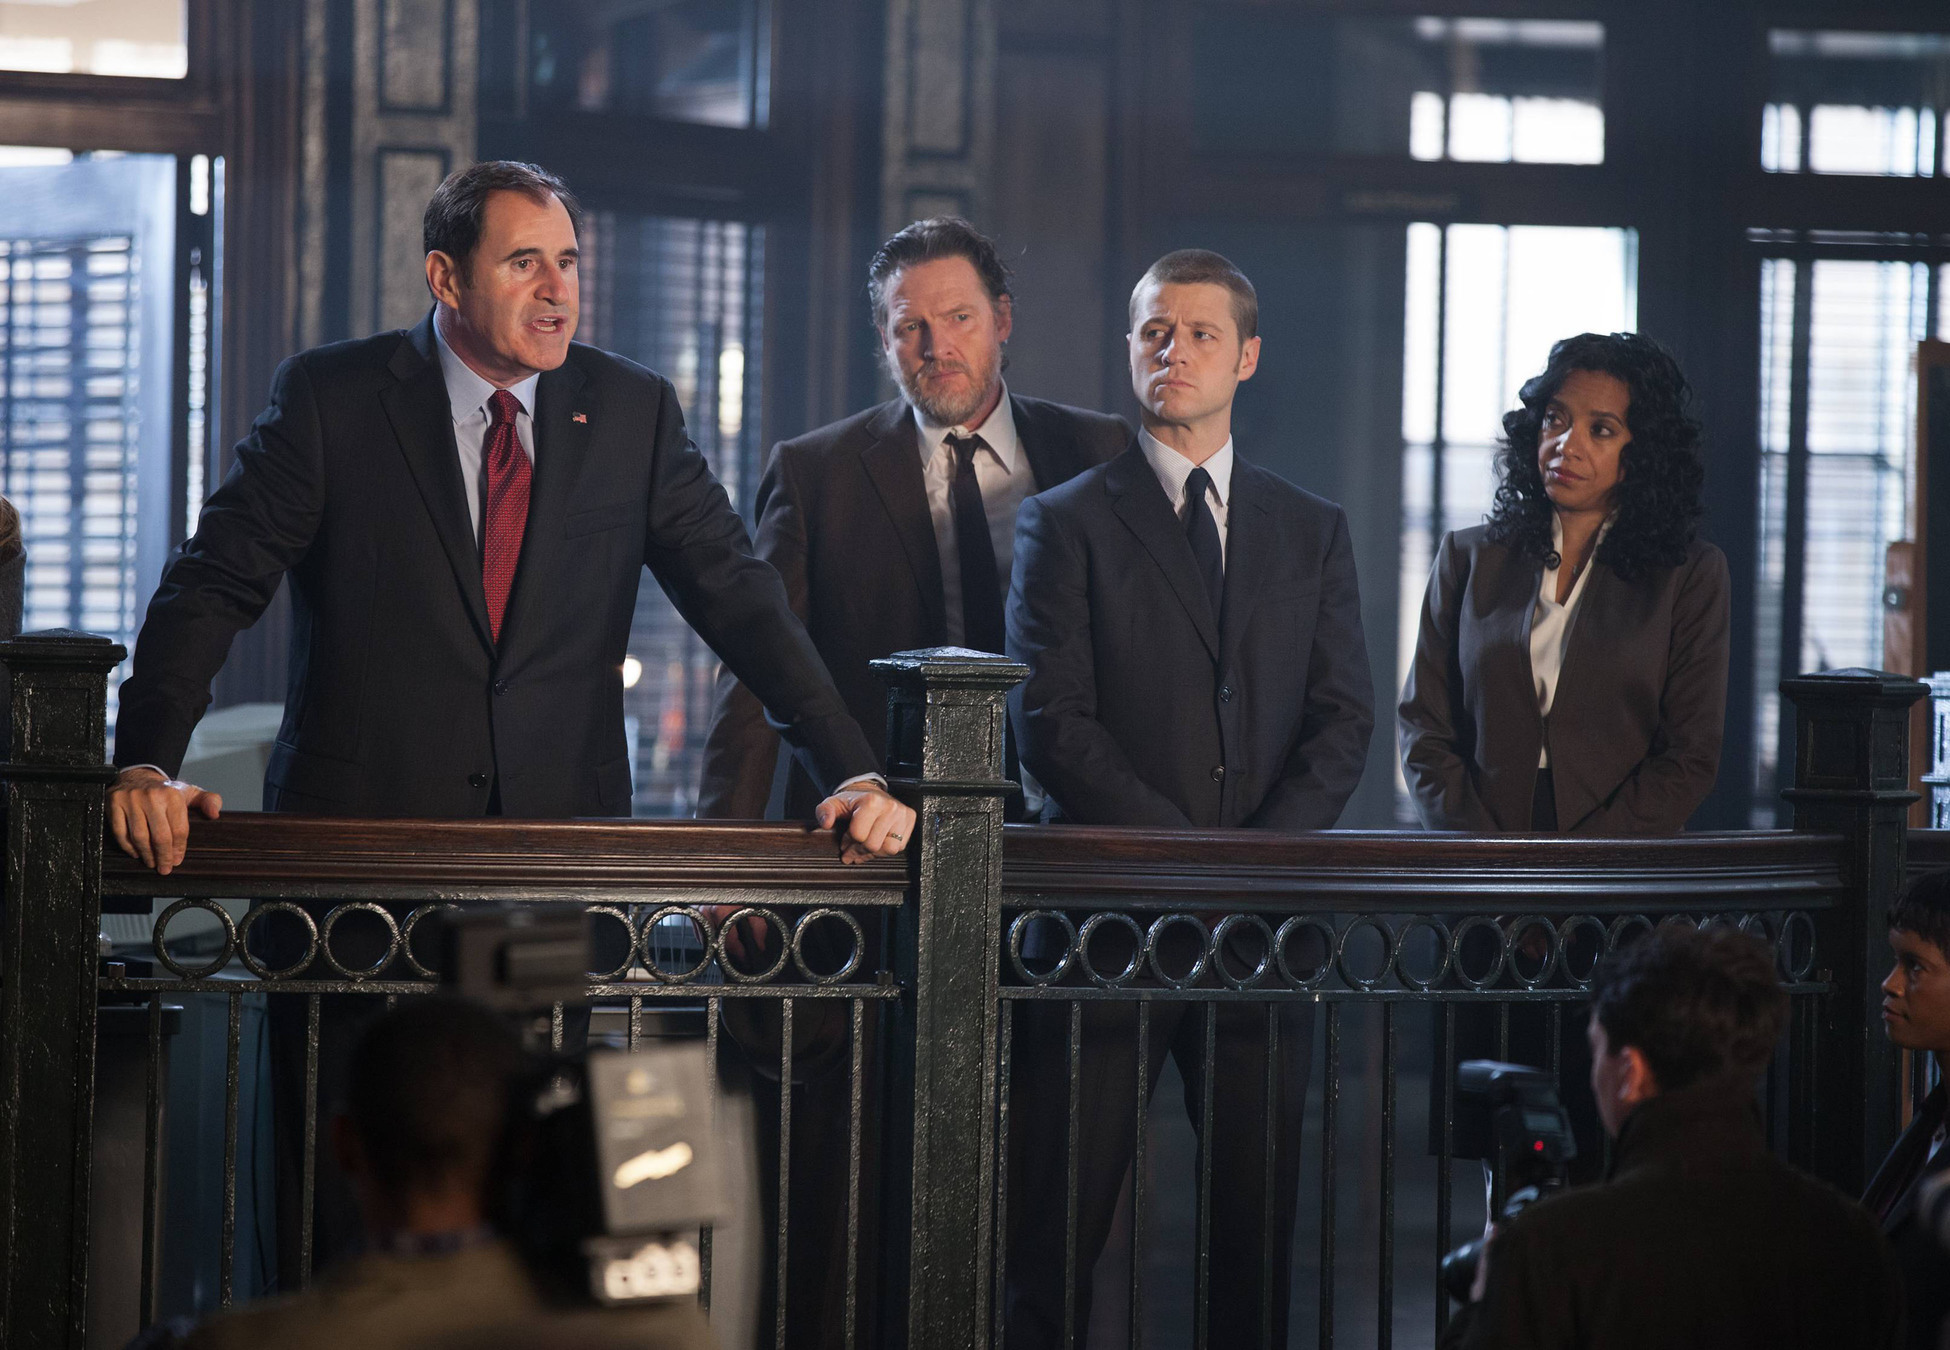 GOTHAM: Mayor James (guest star Richard Kind, L) holds a press conference after Detectives Gordon (Ben McKenzie, second from R) and Bullock (Donal Logue, second from L) apprehend child abductors in the "Selina Kyle" episode of GOTHAM airing Monday, Sept. 29 (8:00-9:00 PM ET/PT) on FOX. Also pictured: Zabryna Guevara. Â©2014 Fox Broadcasting Co. Cr: Jessica Miglio/FOX